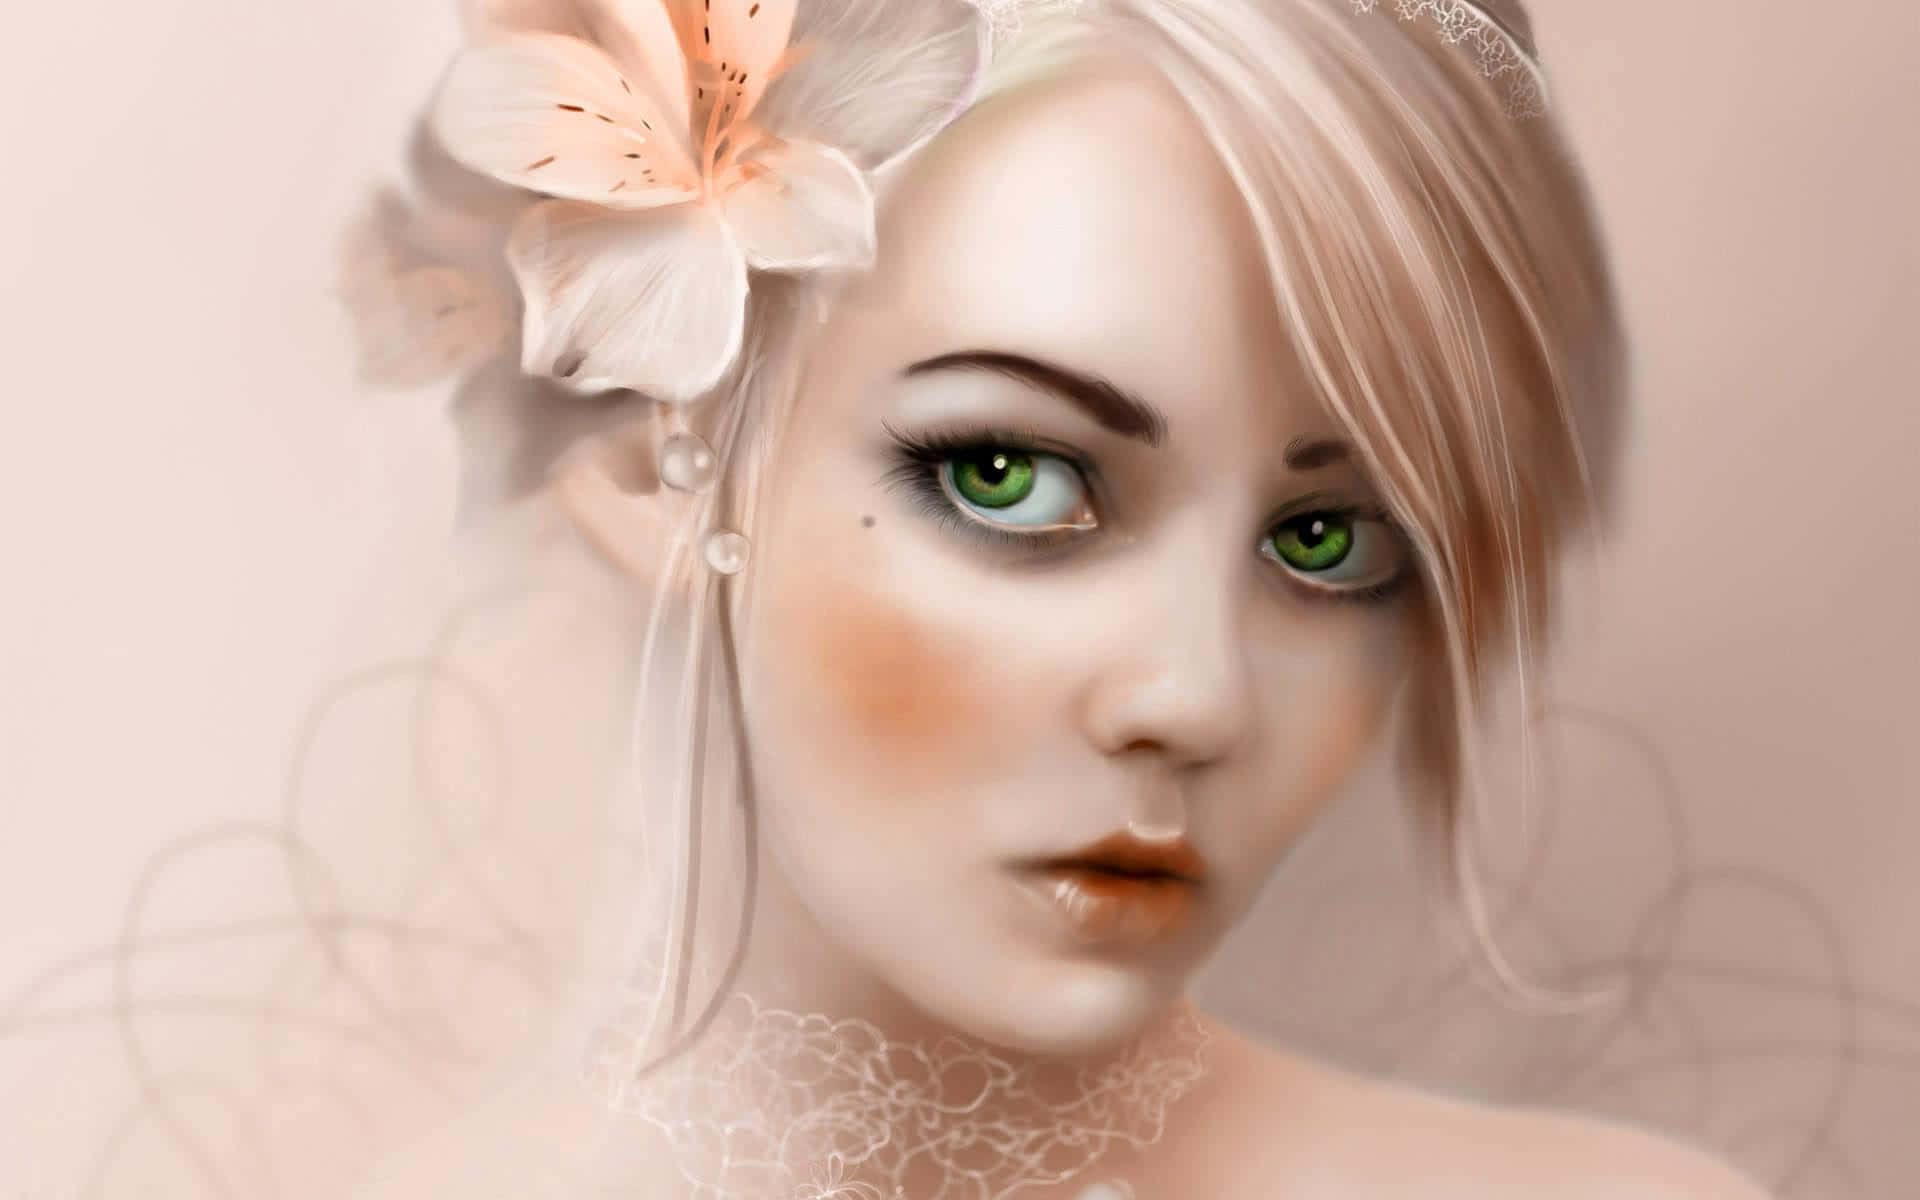 Animated Girl With Green Eyes Wallpaper